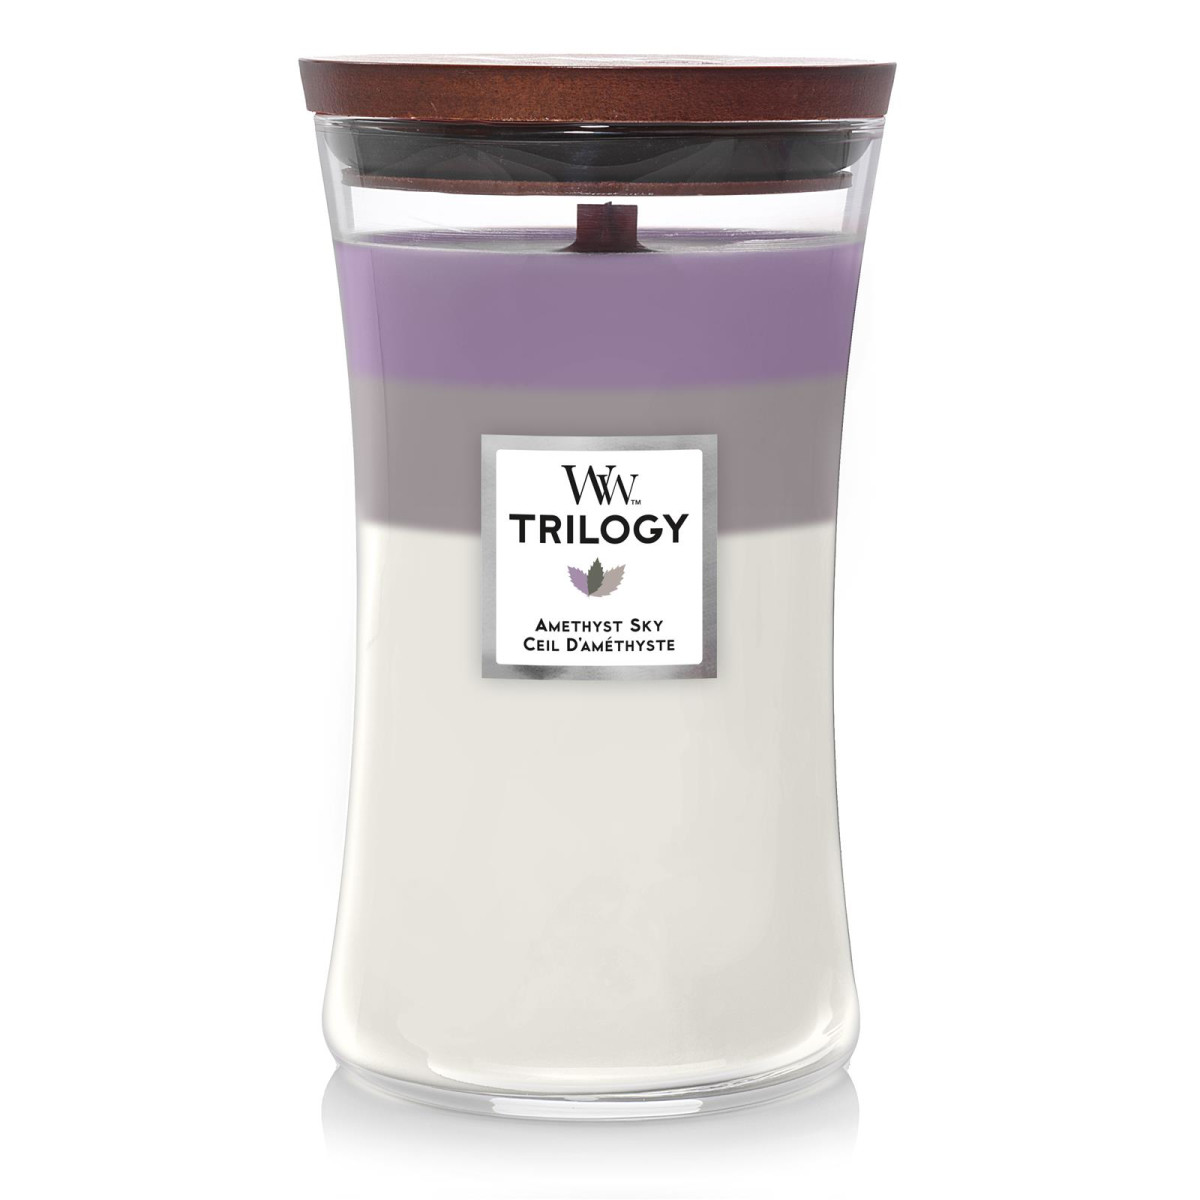 WoodWick Candle Large Lavender Spa